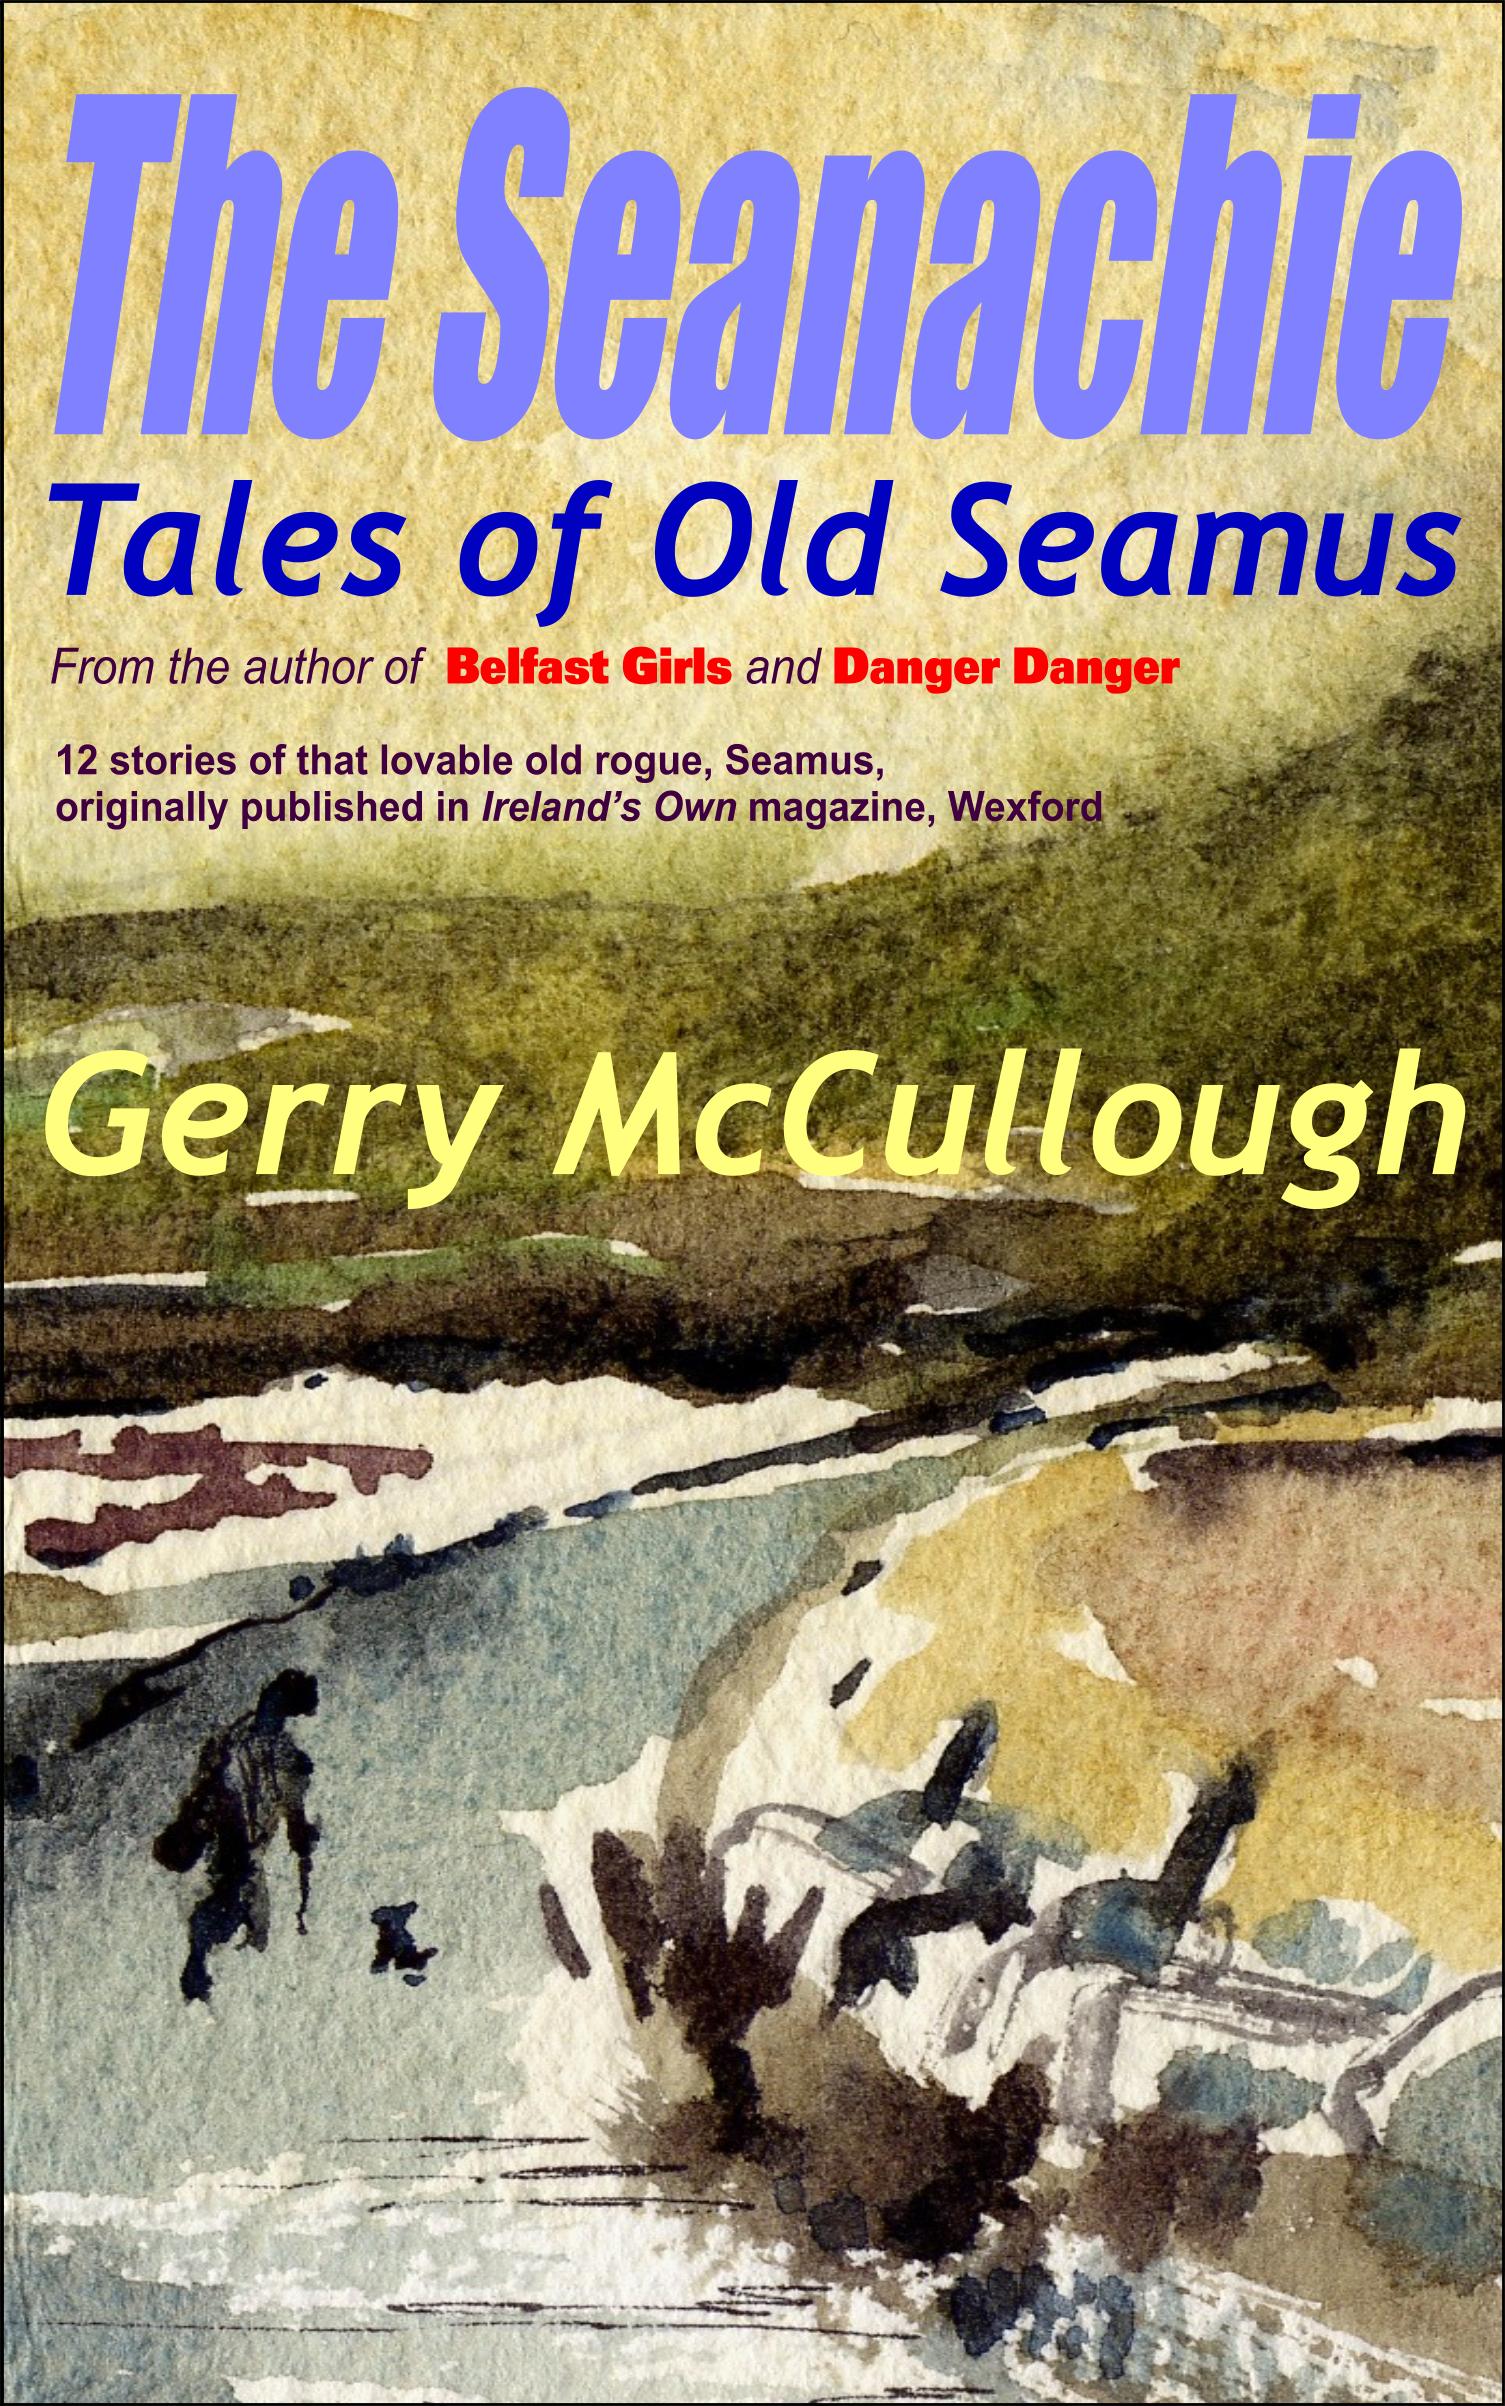 Buy 'The Seanachie: Tales of Old Seamus' from Amazon & other outlets